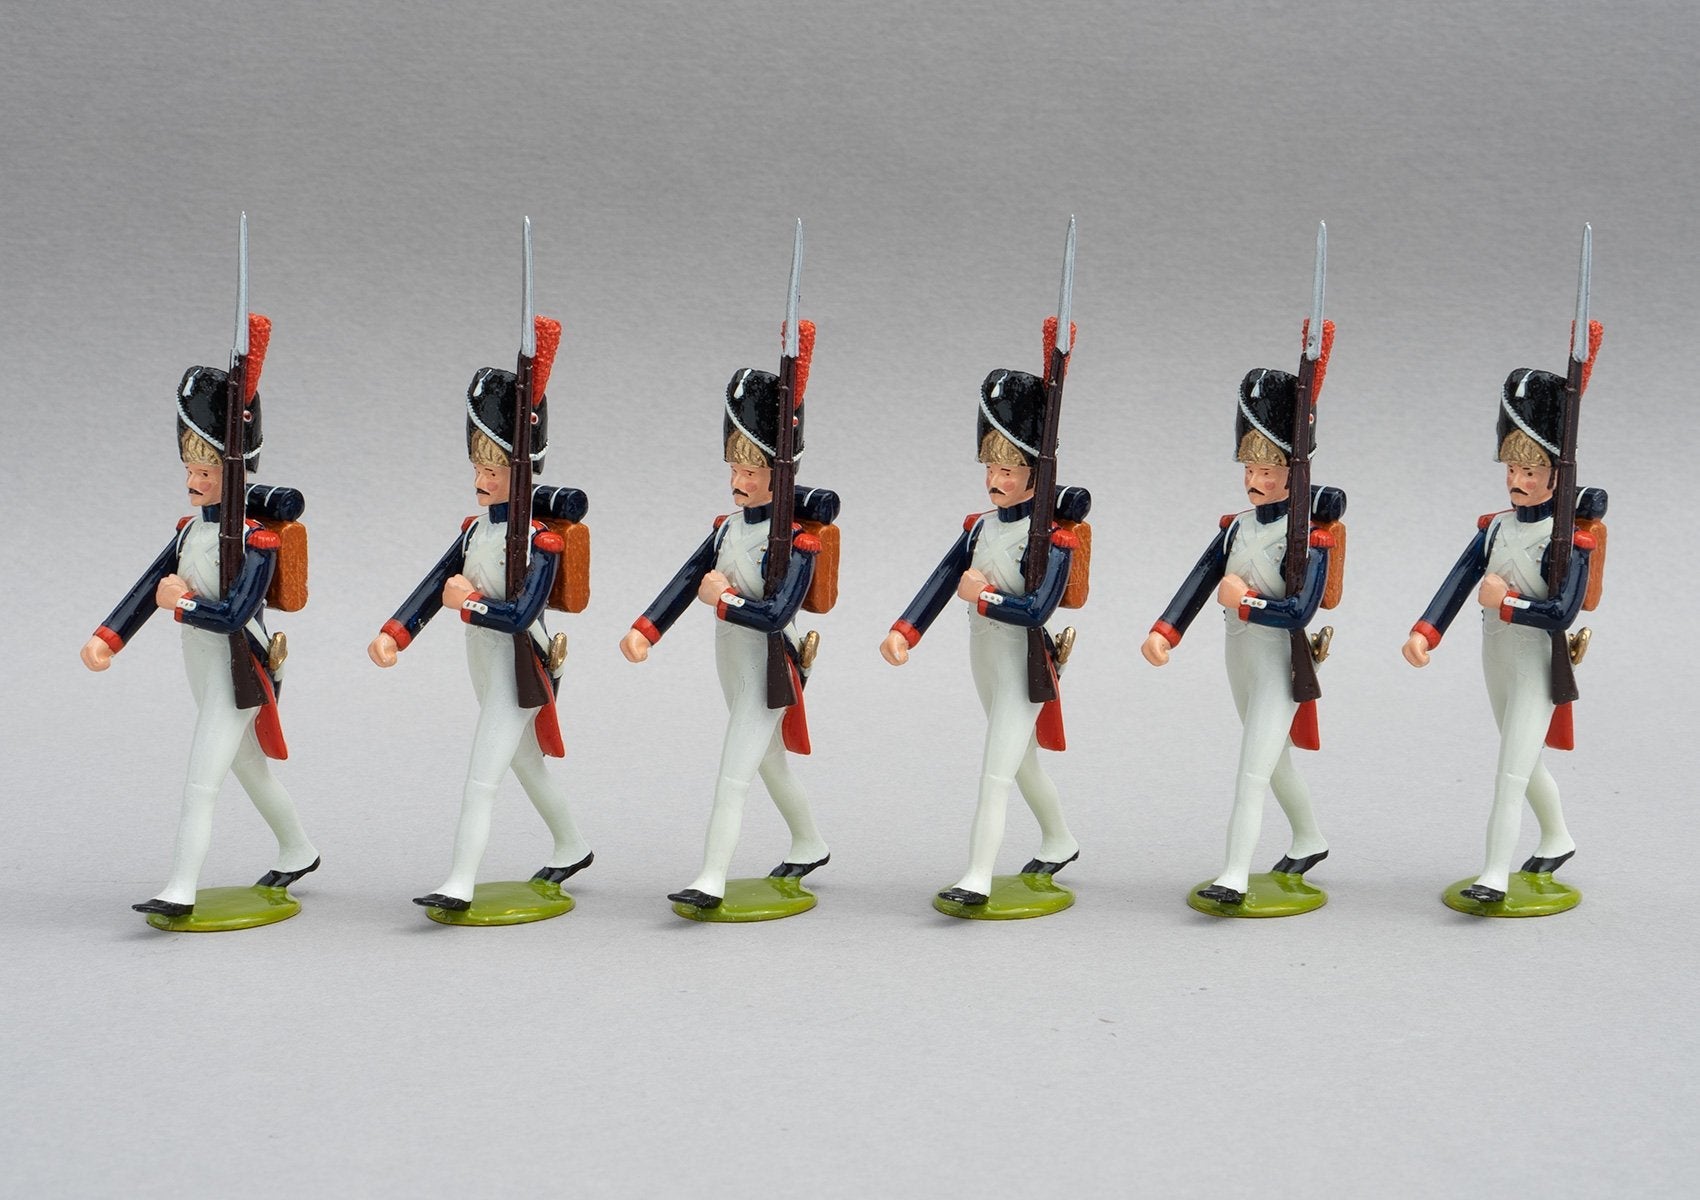 Set 107a Grenadiers à Pied | French Infantry | Napoleonic Wars | Six men marching | Waterloo | © Imperial Productions | Sculpt by David Cowe